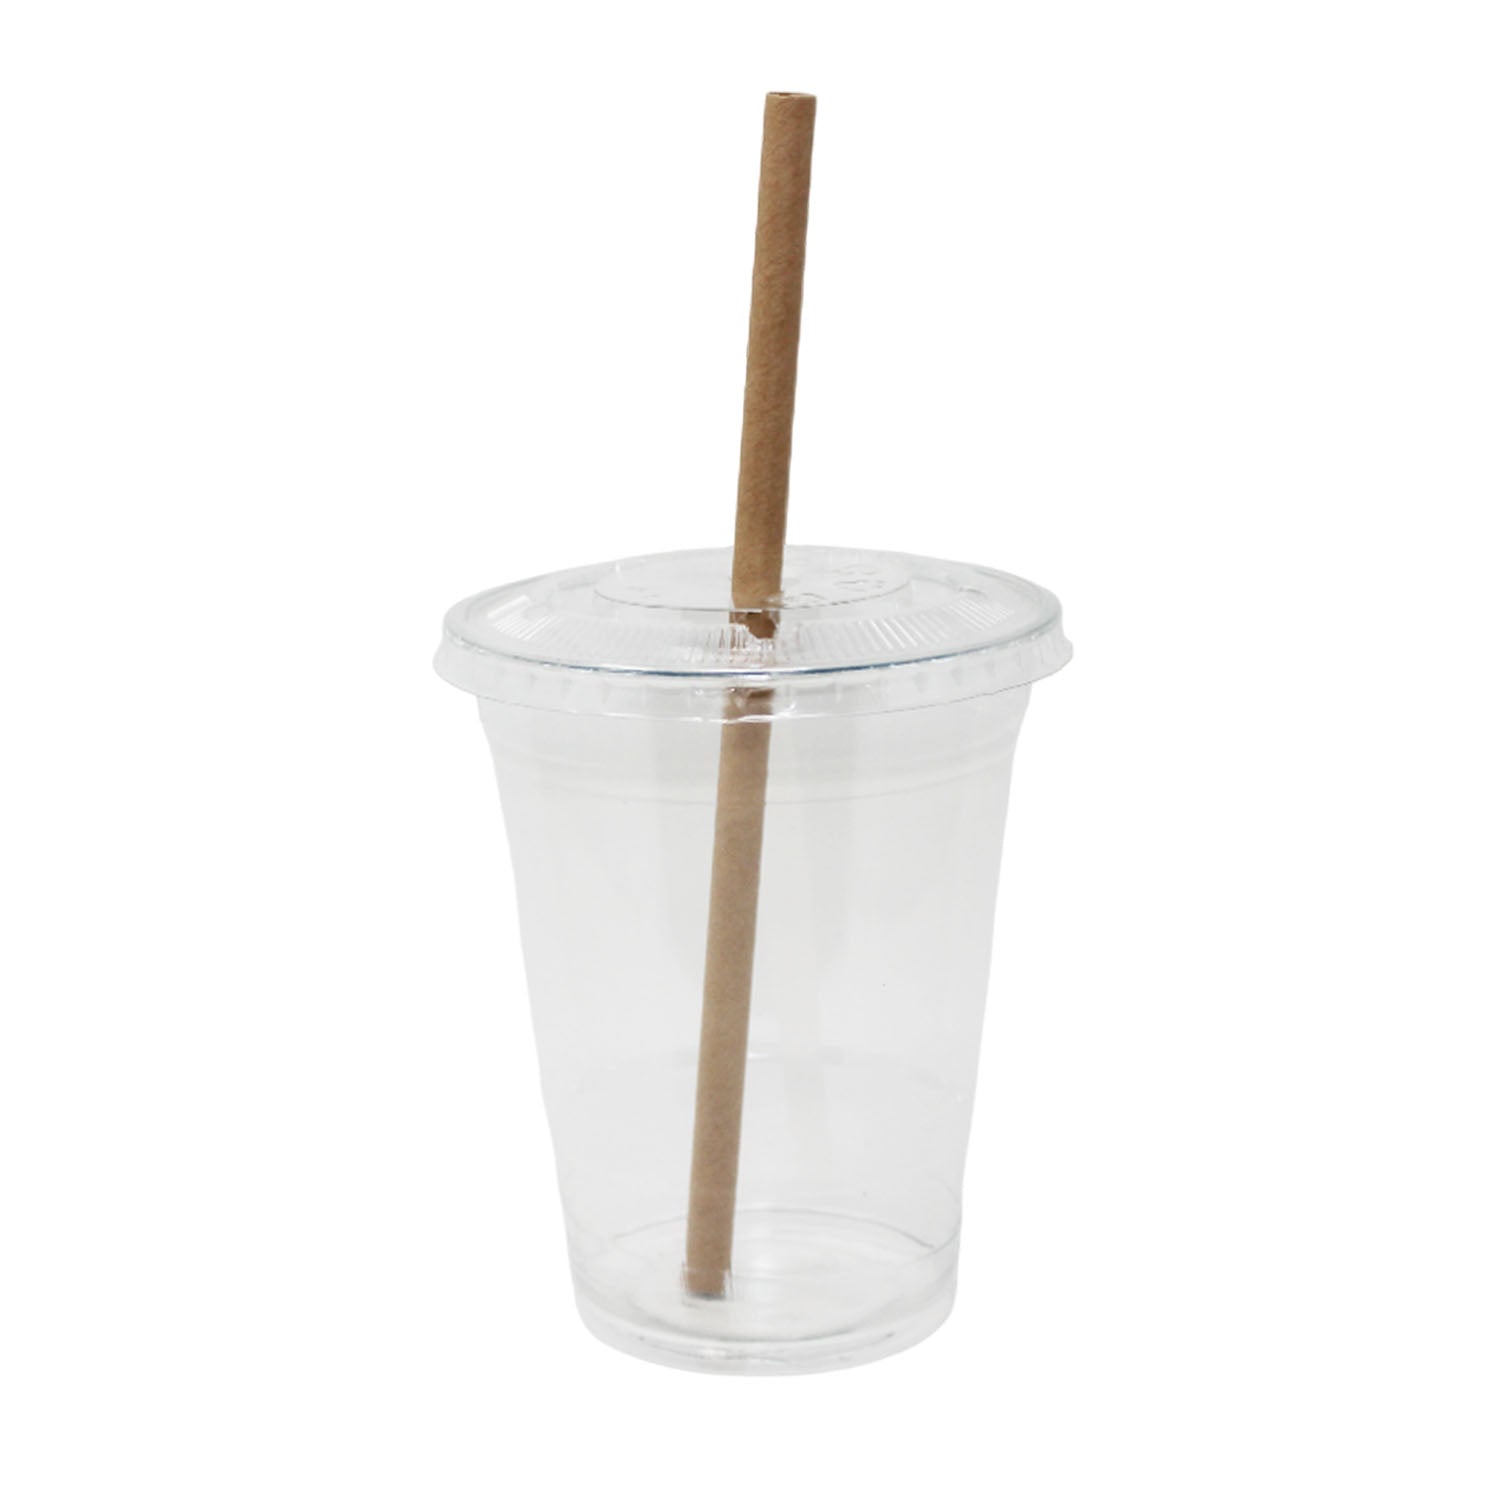 Wrapped Kraft Paper Smoothie Straws 0.3 Inch Wide, Biodegradable Brown Jumbo Durable Drinking Straws, Smoothies, Bubble Tea, Boba, Meal Prep, Shakes